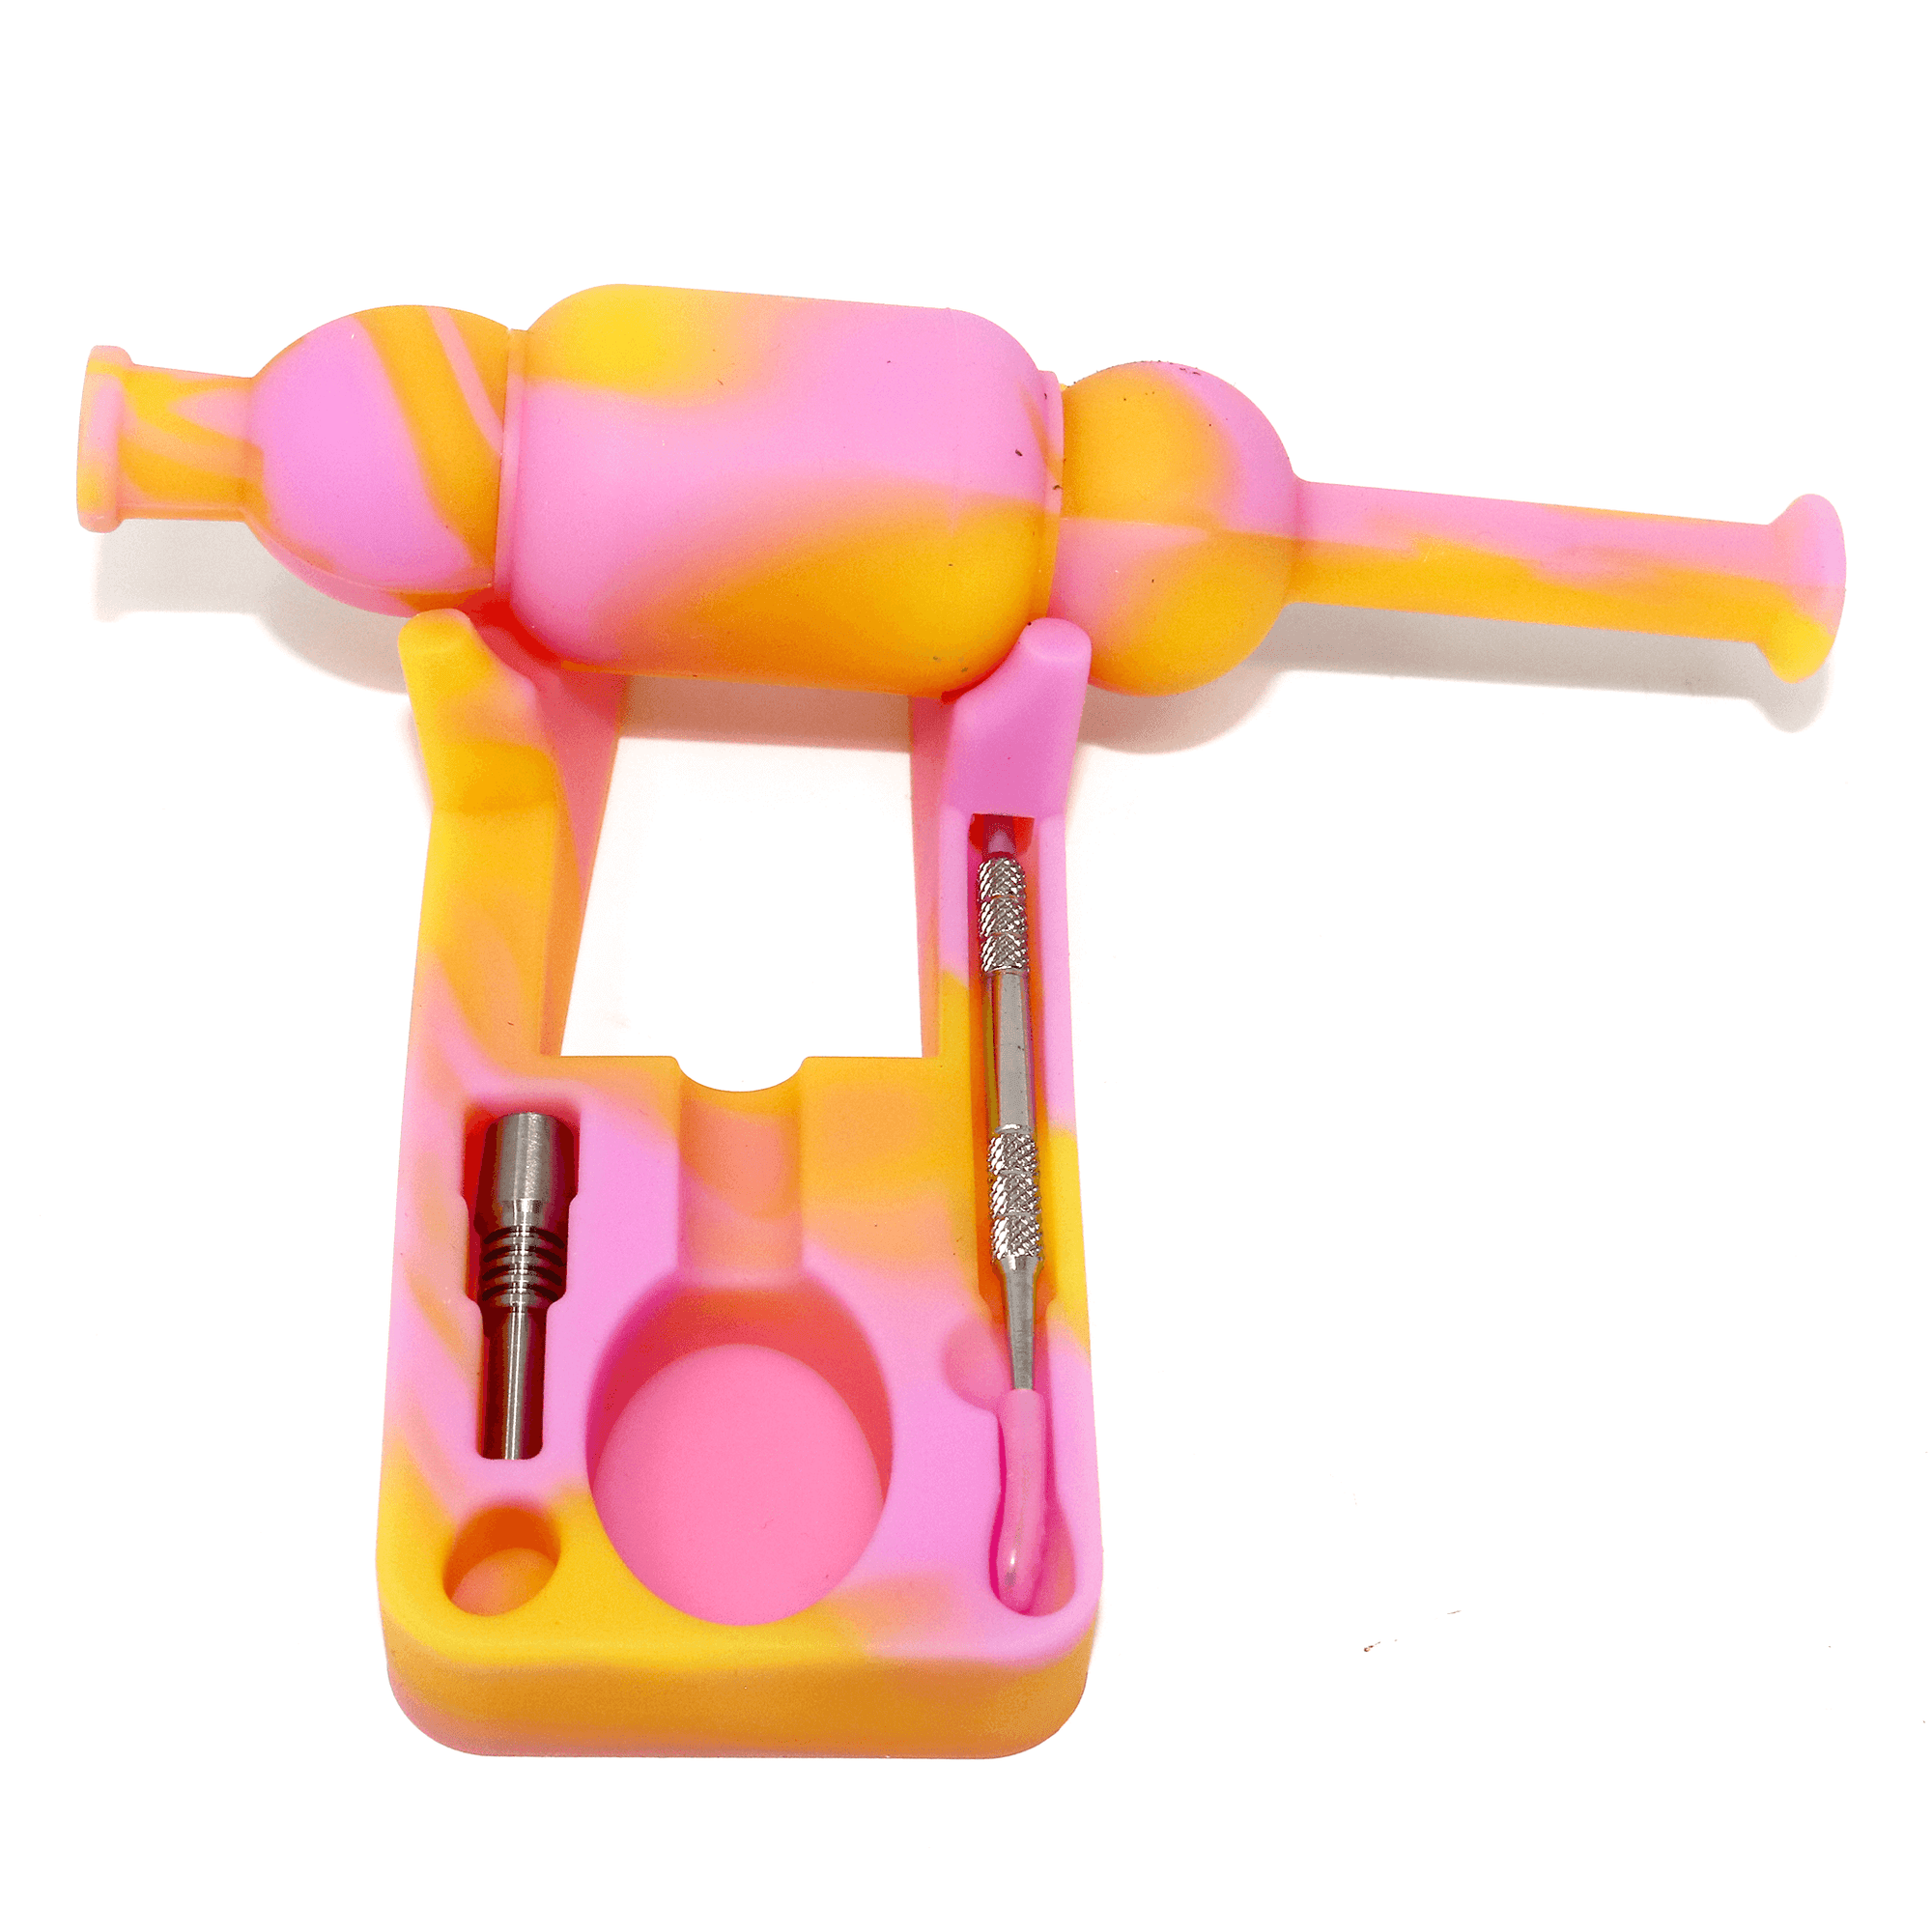 Silicone Nectar Collector | Lavender, Orange, & Pink Top Down Complete View | Dabbing Warehouse